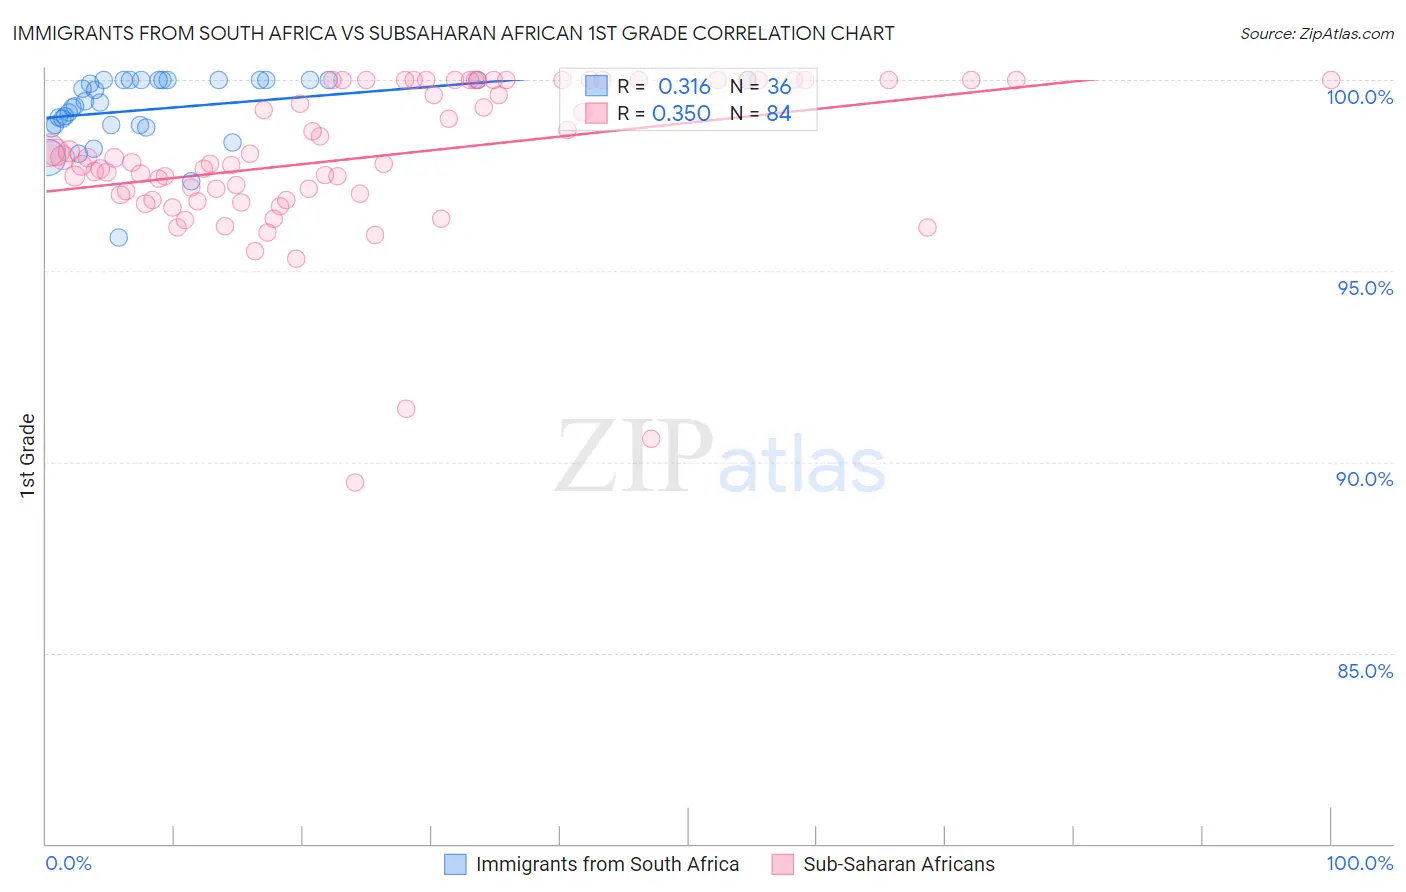 Immigrants from South Africa vs Subsaharan African 1st Grade